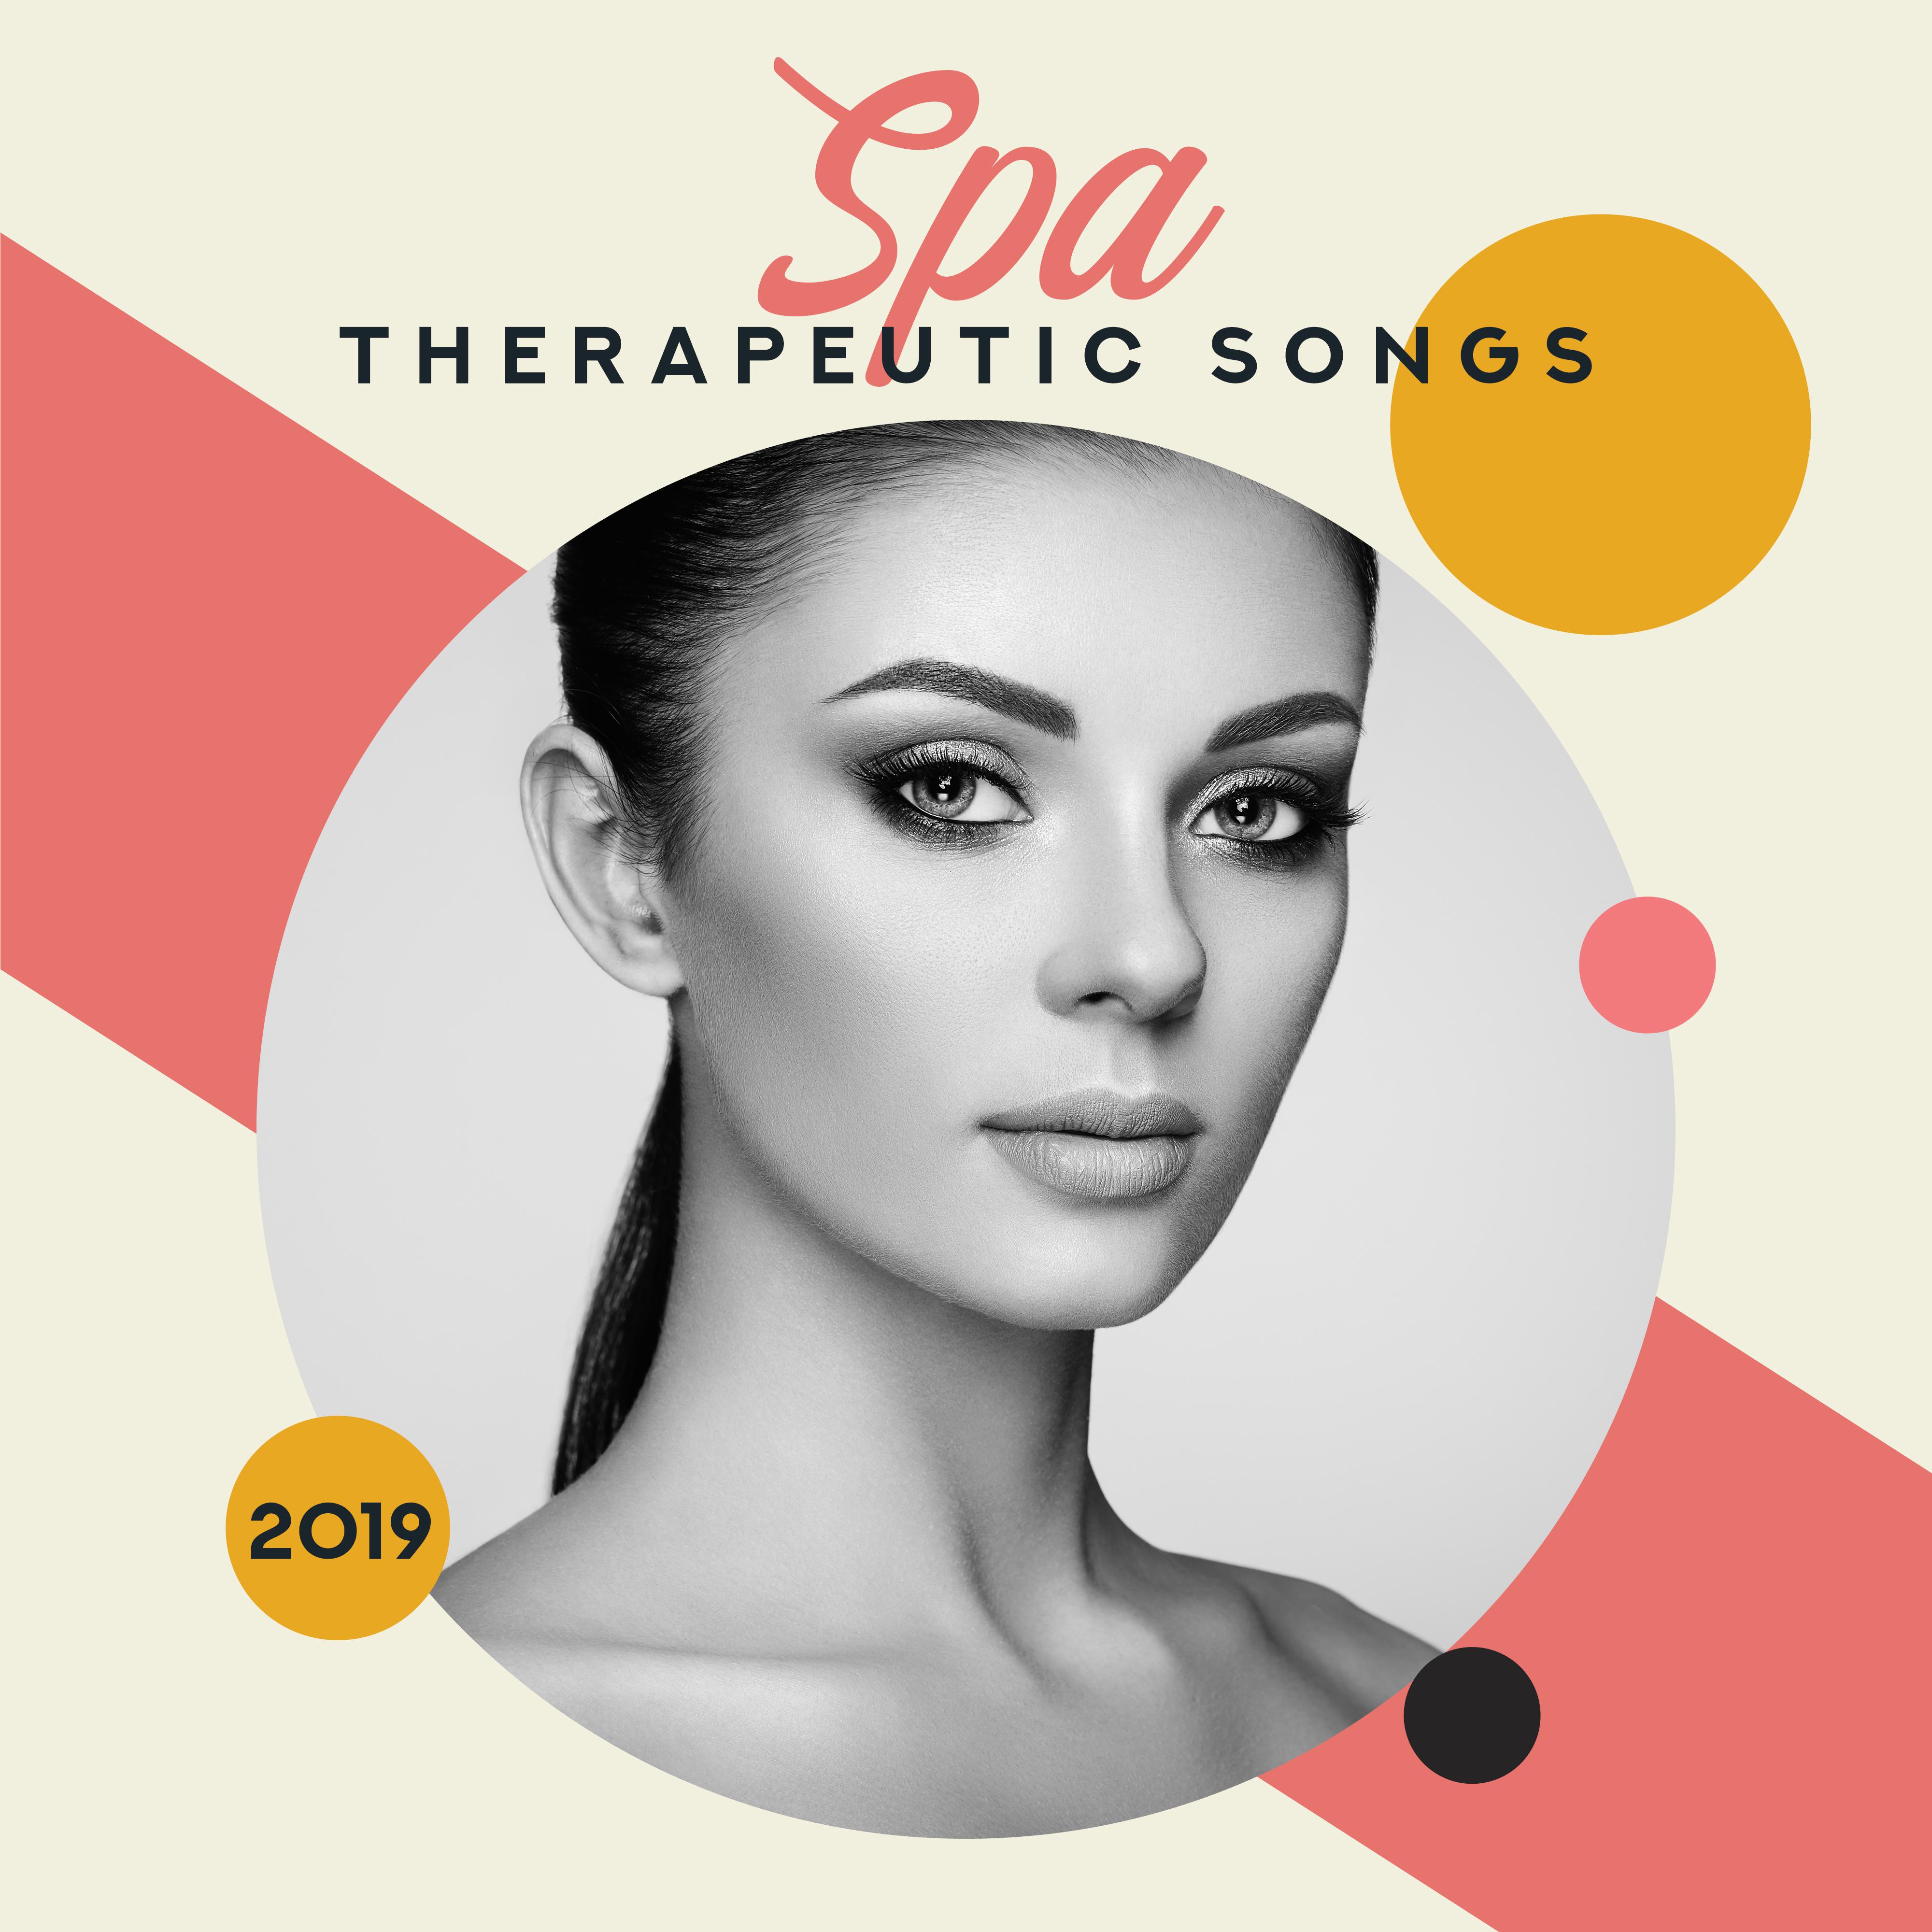 Spa Therapeutic Songs 2019: 15 New Age Deep & Nature Music Perfect for Spa, Wellness & Healing Massage